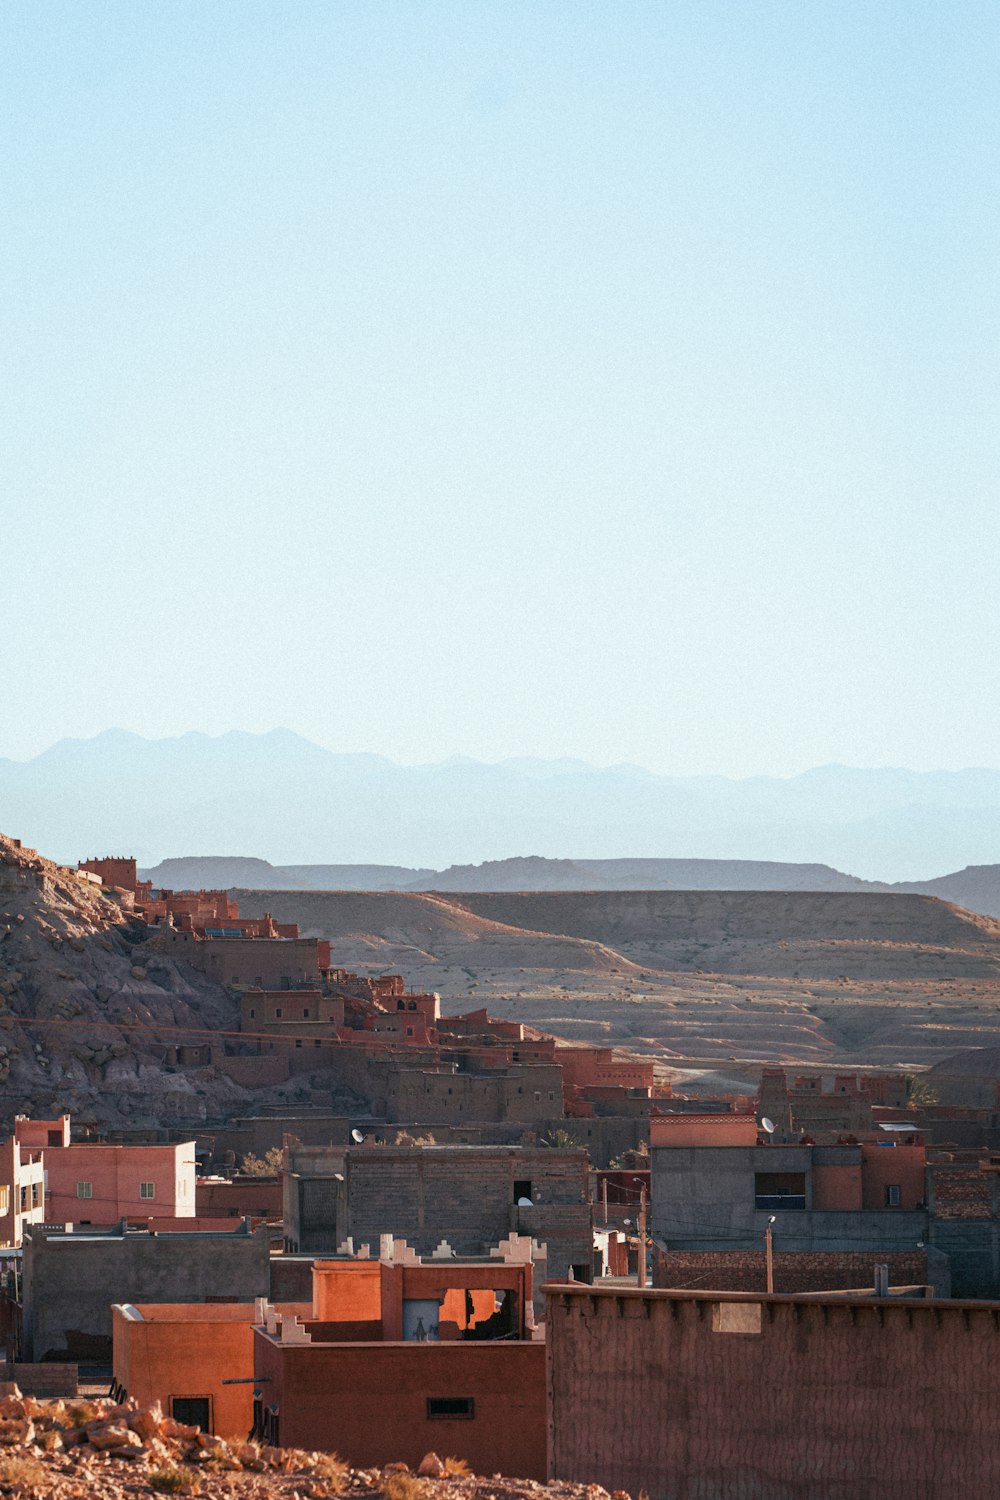 a view of a small town in the middle of the desert